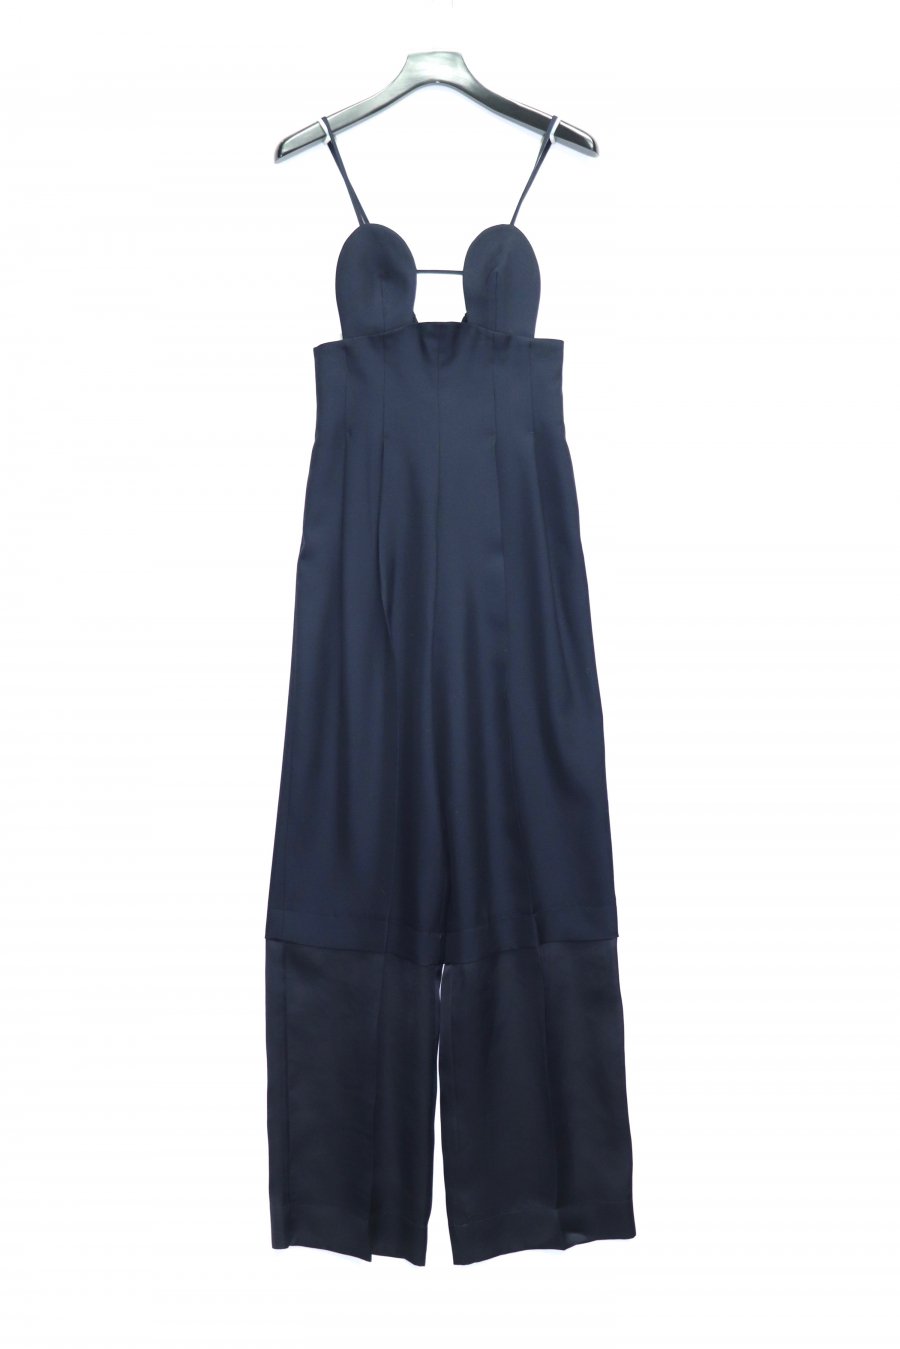 FETICO（フェティコ）のCOMBINED ORGANZA 2WAY BRA JUMPSUITS NAVY 